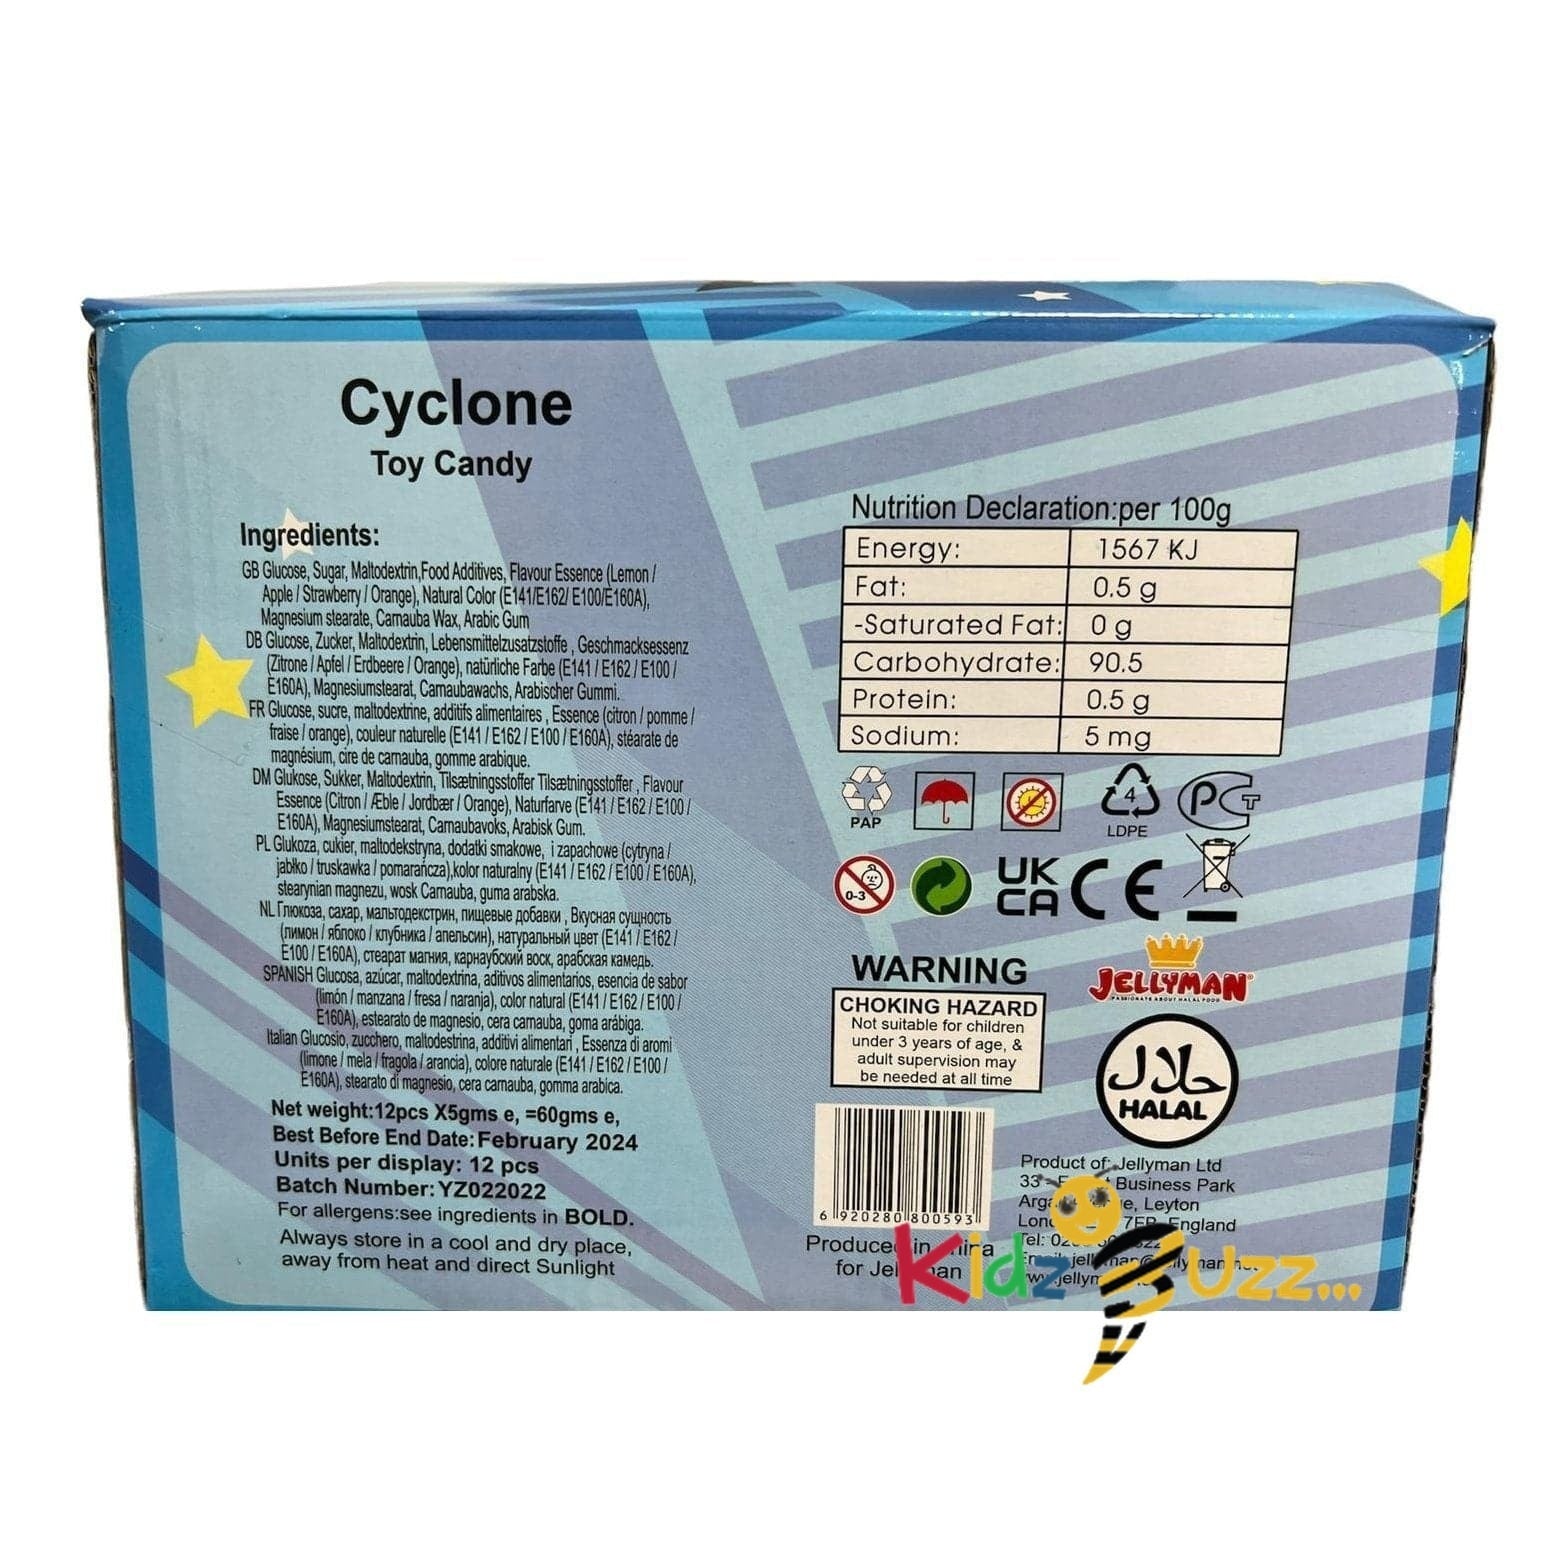 Cyclone Toy Candy